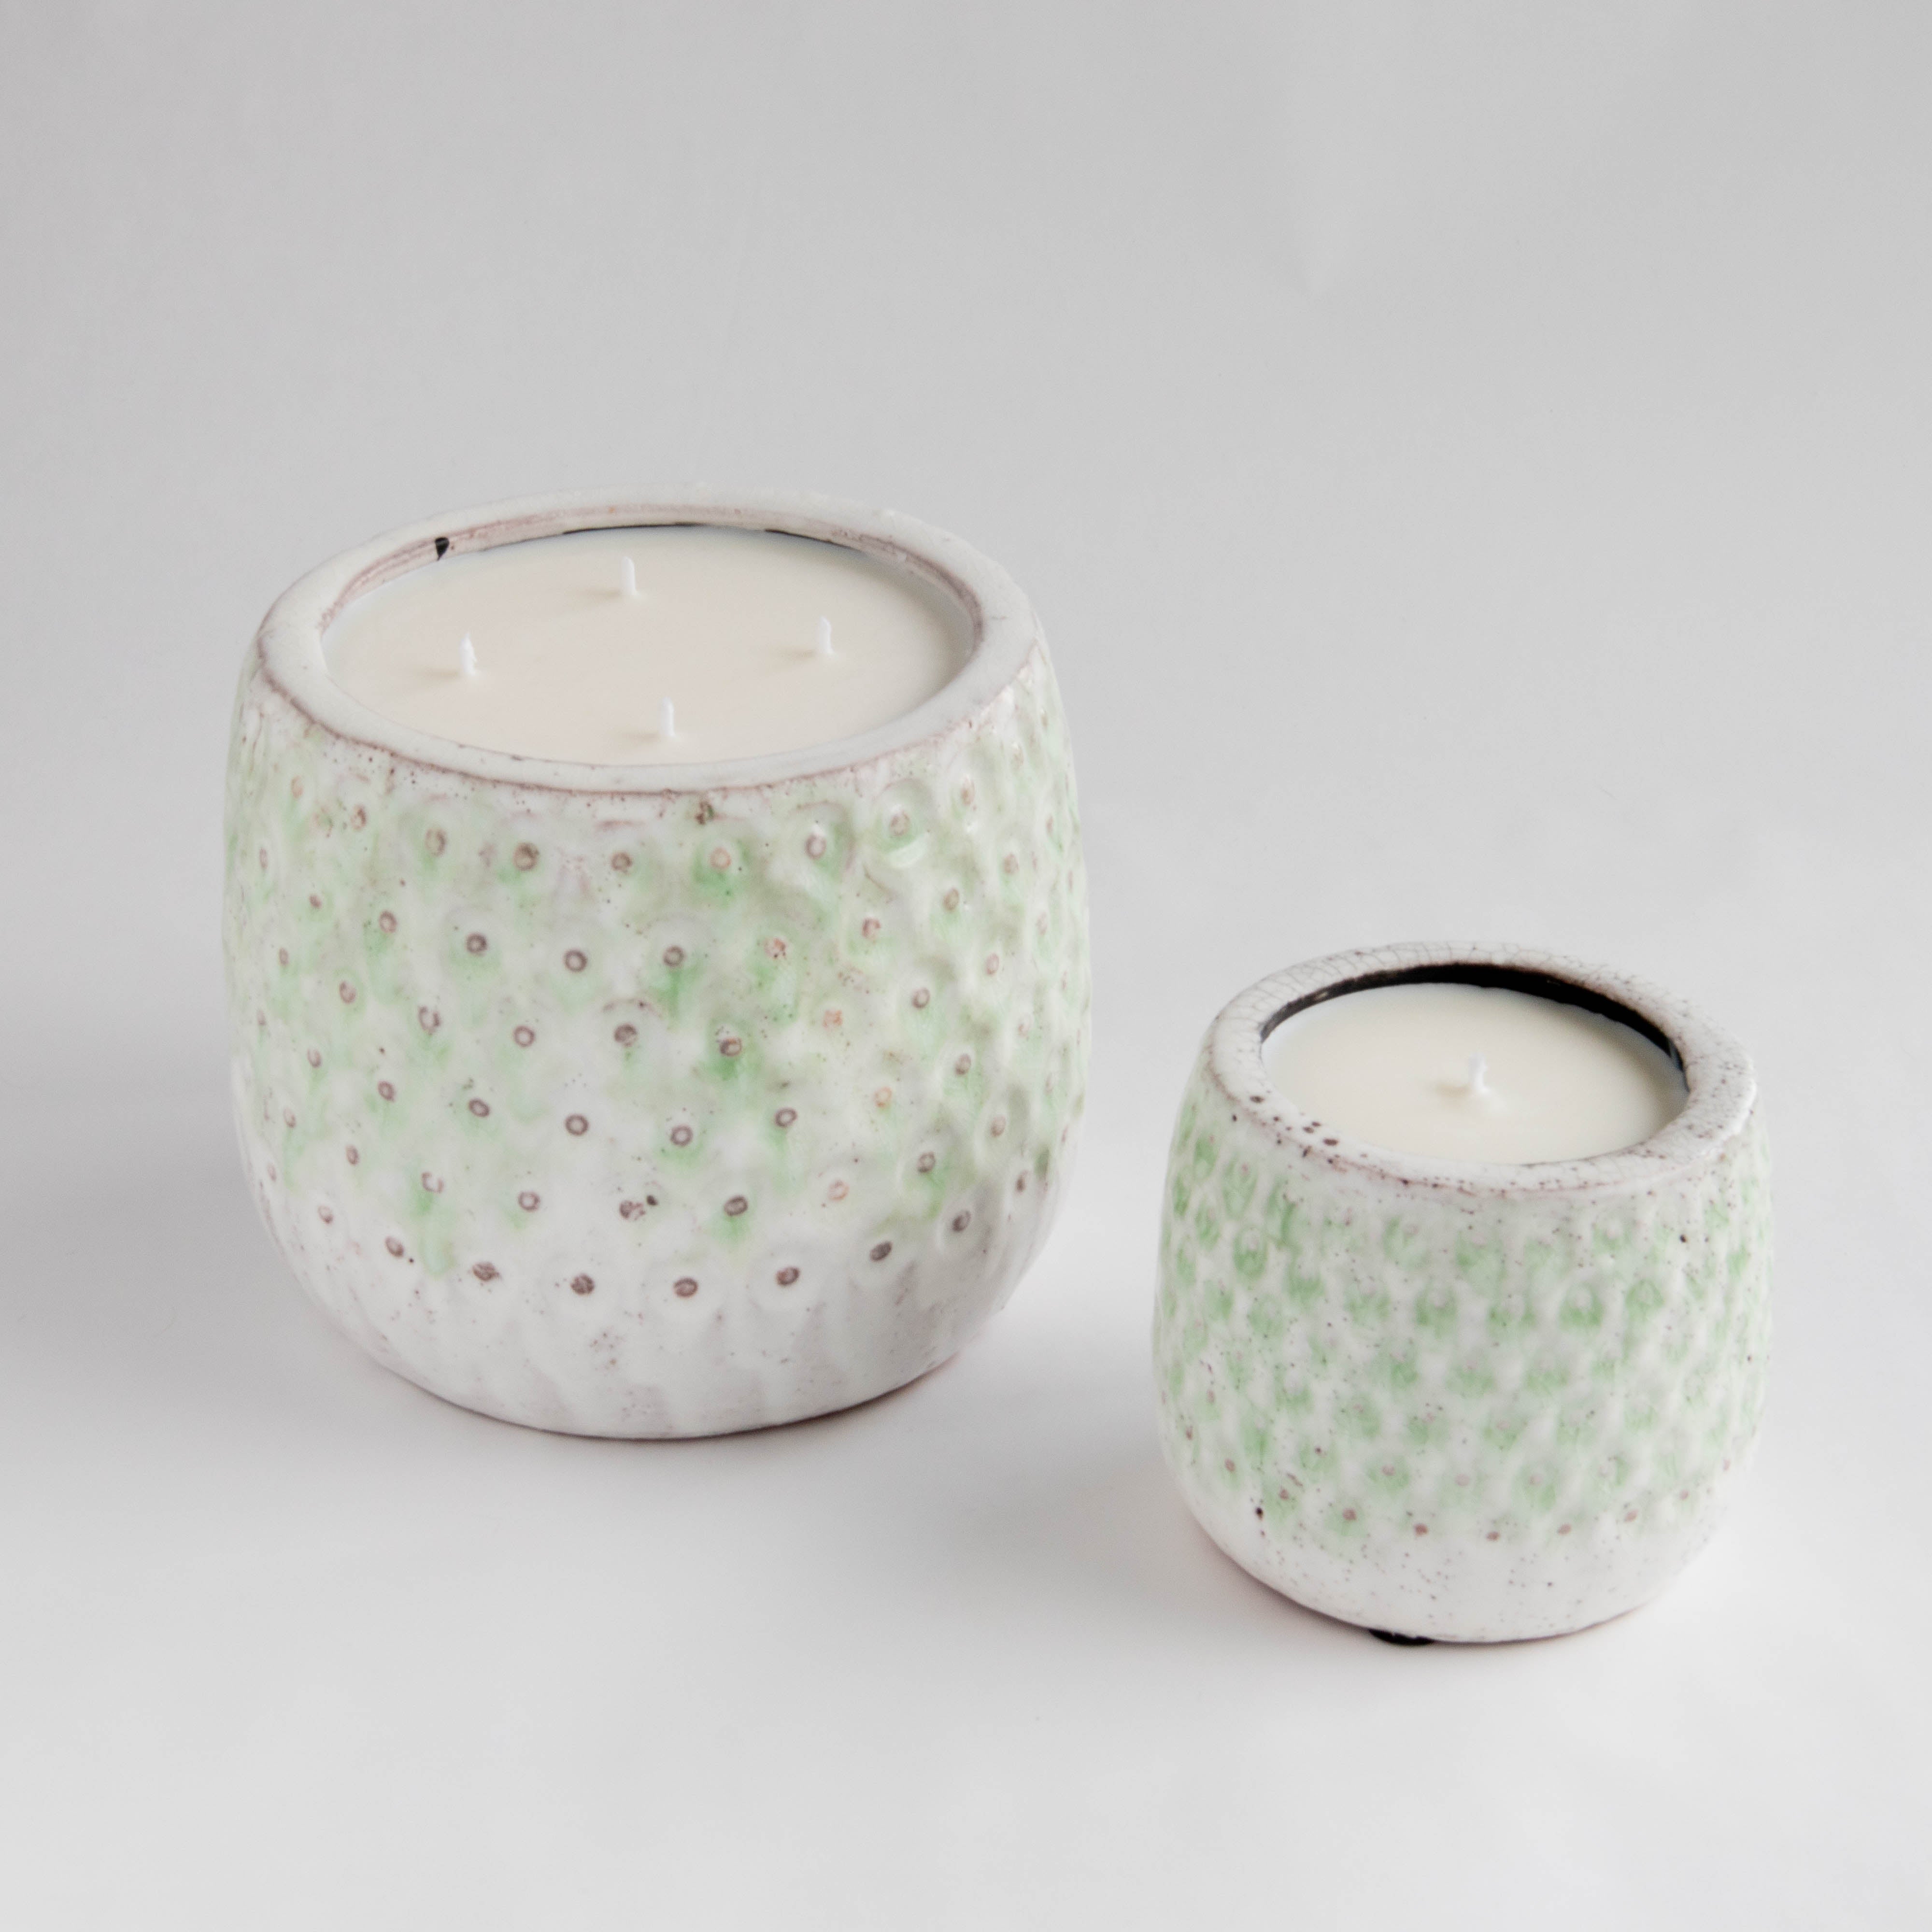 Green + White Pineapple Pot Set with embossed pattern. Both candles sold as set in Medium and Small sizes | soy candles | soy wax | wax candle | soy wax candles | natural soy | big candles | large candles | lavender candles | 